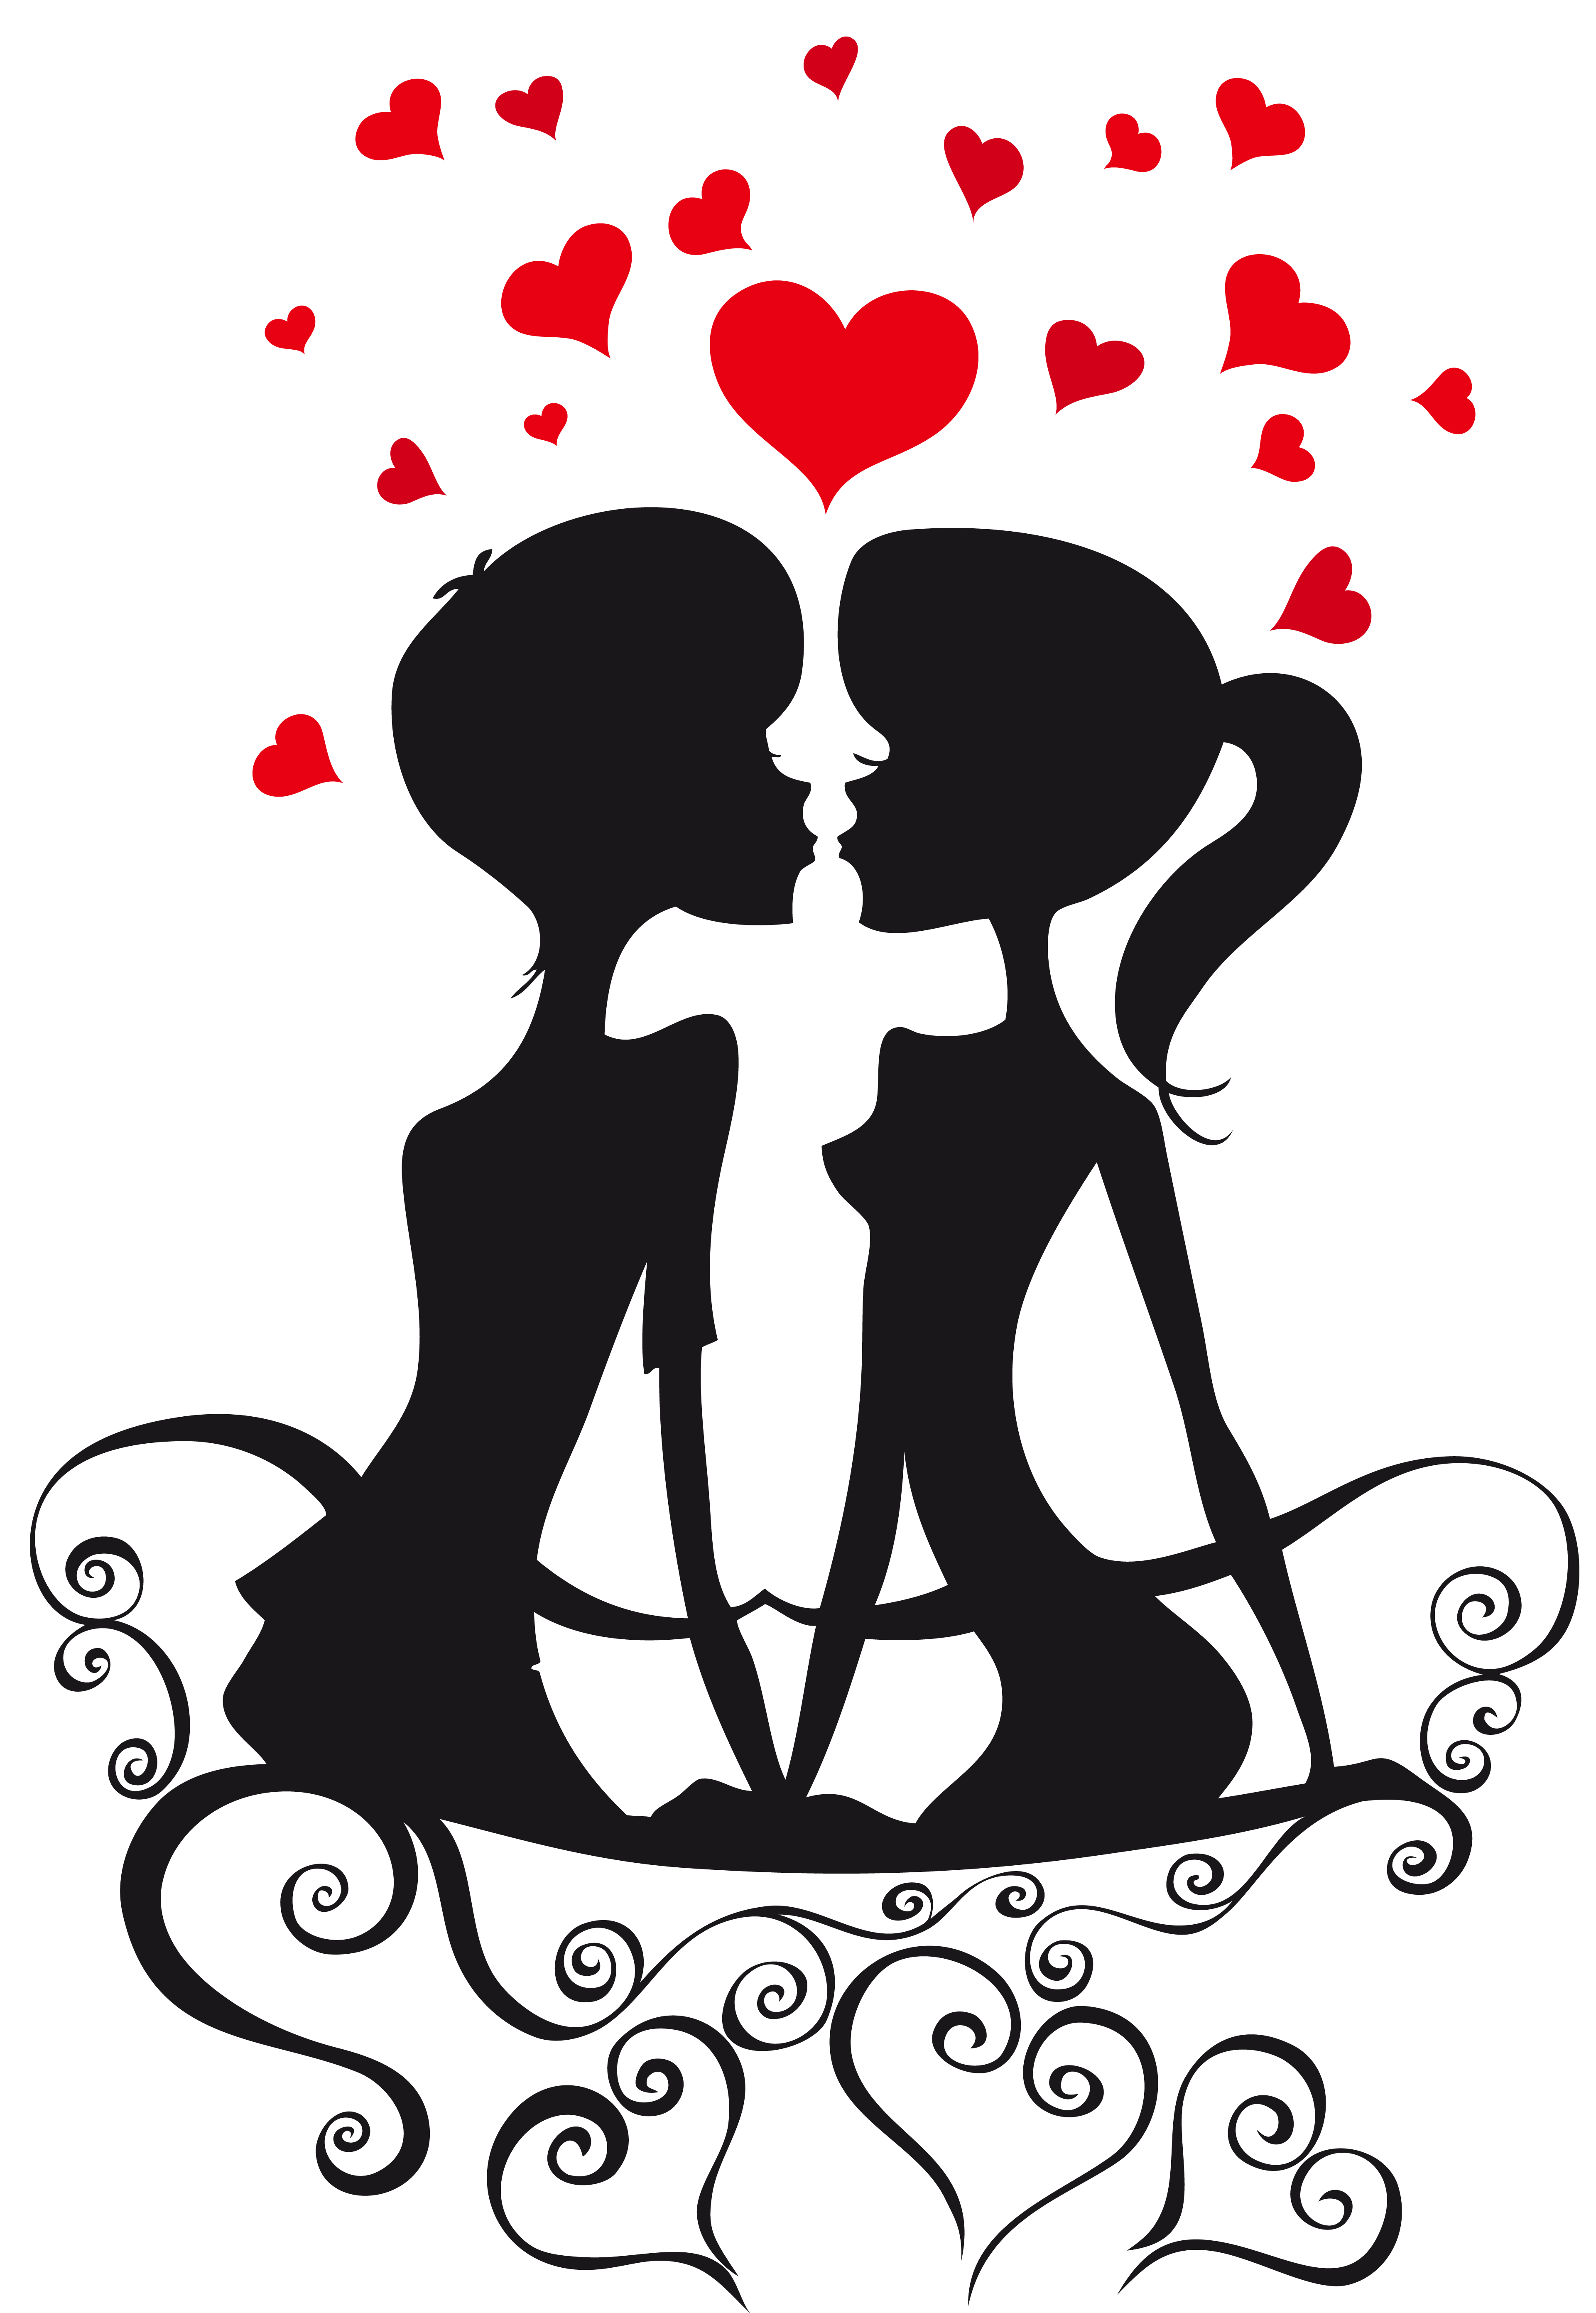 Excited clipart high energy. Love couple silhouettes on